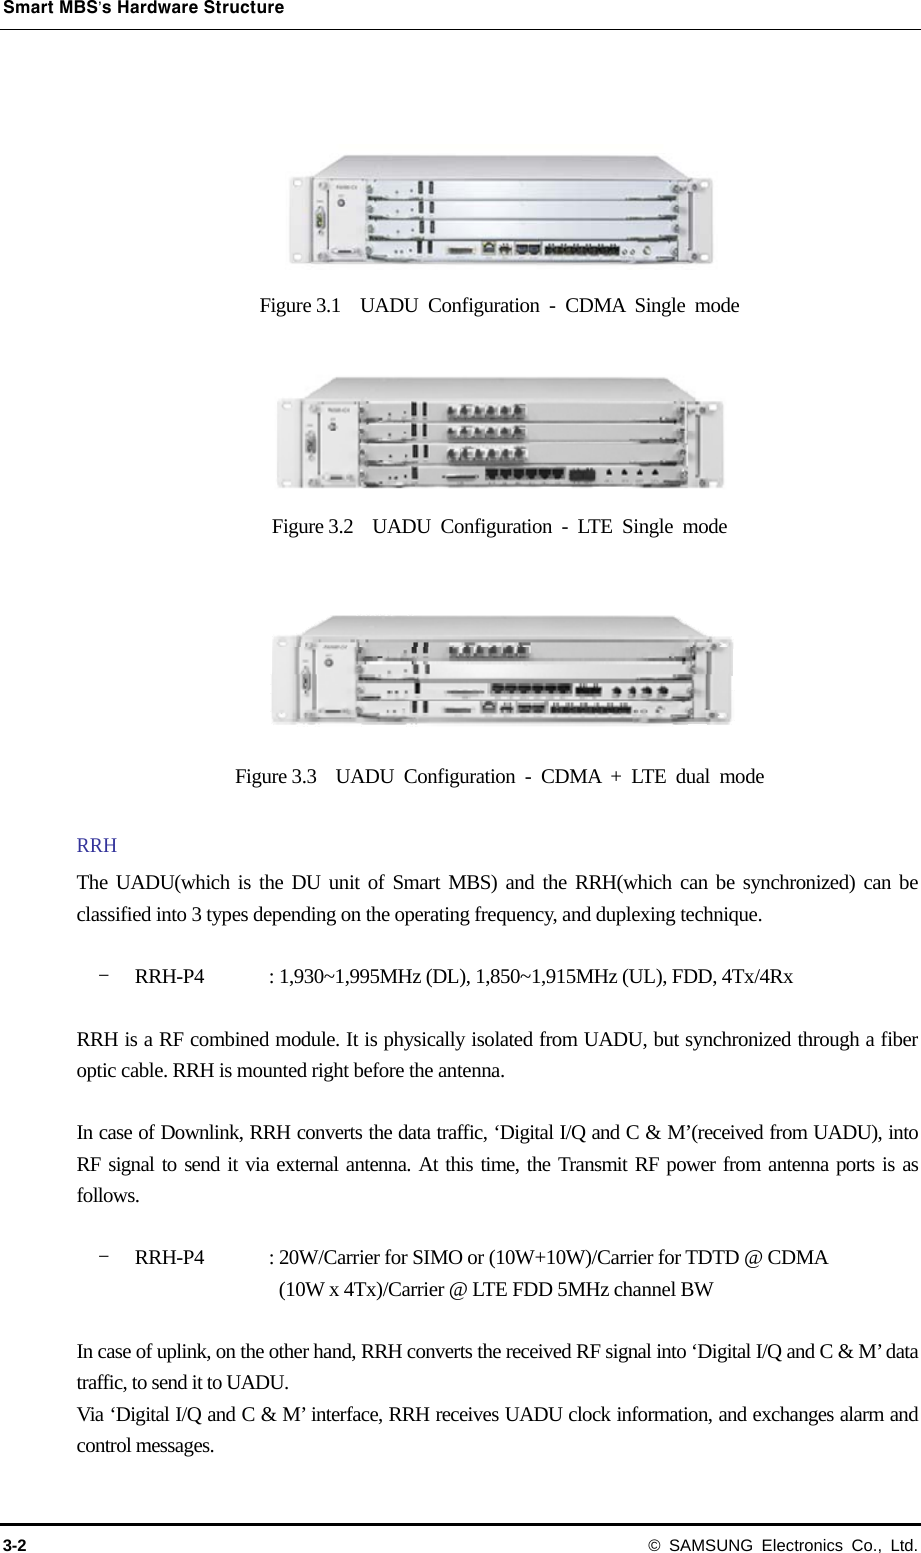 Smart MBS’s Hardware Structure 3-2 © SAMSUNG Electronics Co., Ltd.   Figure 3.1  UADU Configuration - CDMA Single mode  Figure 3.2  UADU Configuration - LTE Single mode  Figure 3.3  UADU Configuration - CDMA + LTE dual mode  RRH The UADU(which is the DU unit of Smart MBS) and the RRH(which can be synchronized) can be classified into 3 types depending on the operating frequency, and duplexing technique.  - RRH-P4  : 1,930~1,995MHz (DL), 1,850~1,915MHz (UL), FDD, 4Tx/4Rx      RRH is a RF combined module. It is physically isolated from UADU, but synchronized through a fiber optic cable. RRH is mounted right before the antenna.  In case of Downlink, RRH converts the data traffic, ‘Digital I/Q and C &amp; M’(received from UADU), into RF signal to send it via external antenna. At this time, the Transmit RF power from antenna ports is as follows.  - RRH-P4  : 20W/Carrier for SIMO or (10W+10W)/Carrier for TDTD @ CDMA (10W x 4Tx)/Carrier @ LTE FDD 5MHz channel BW  In case of uplink, on the other hand, RRH converts the received RF signal into ‘Digital I/Q and C &amp; M’ data traffic, to send it to UADU. Via ‘Digital I/Q and C &amp; M’ interface, RRH receives UADU clock information, and exchanges alarm and control messages.  